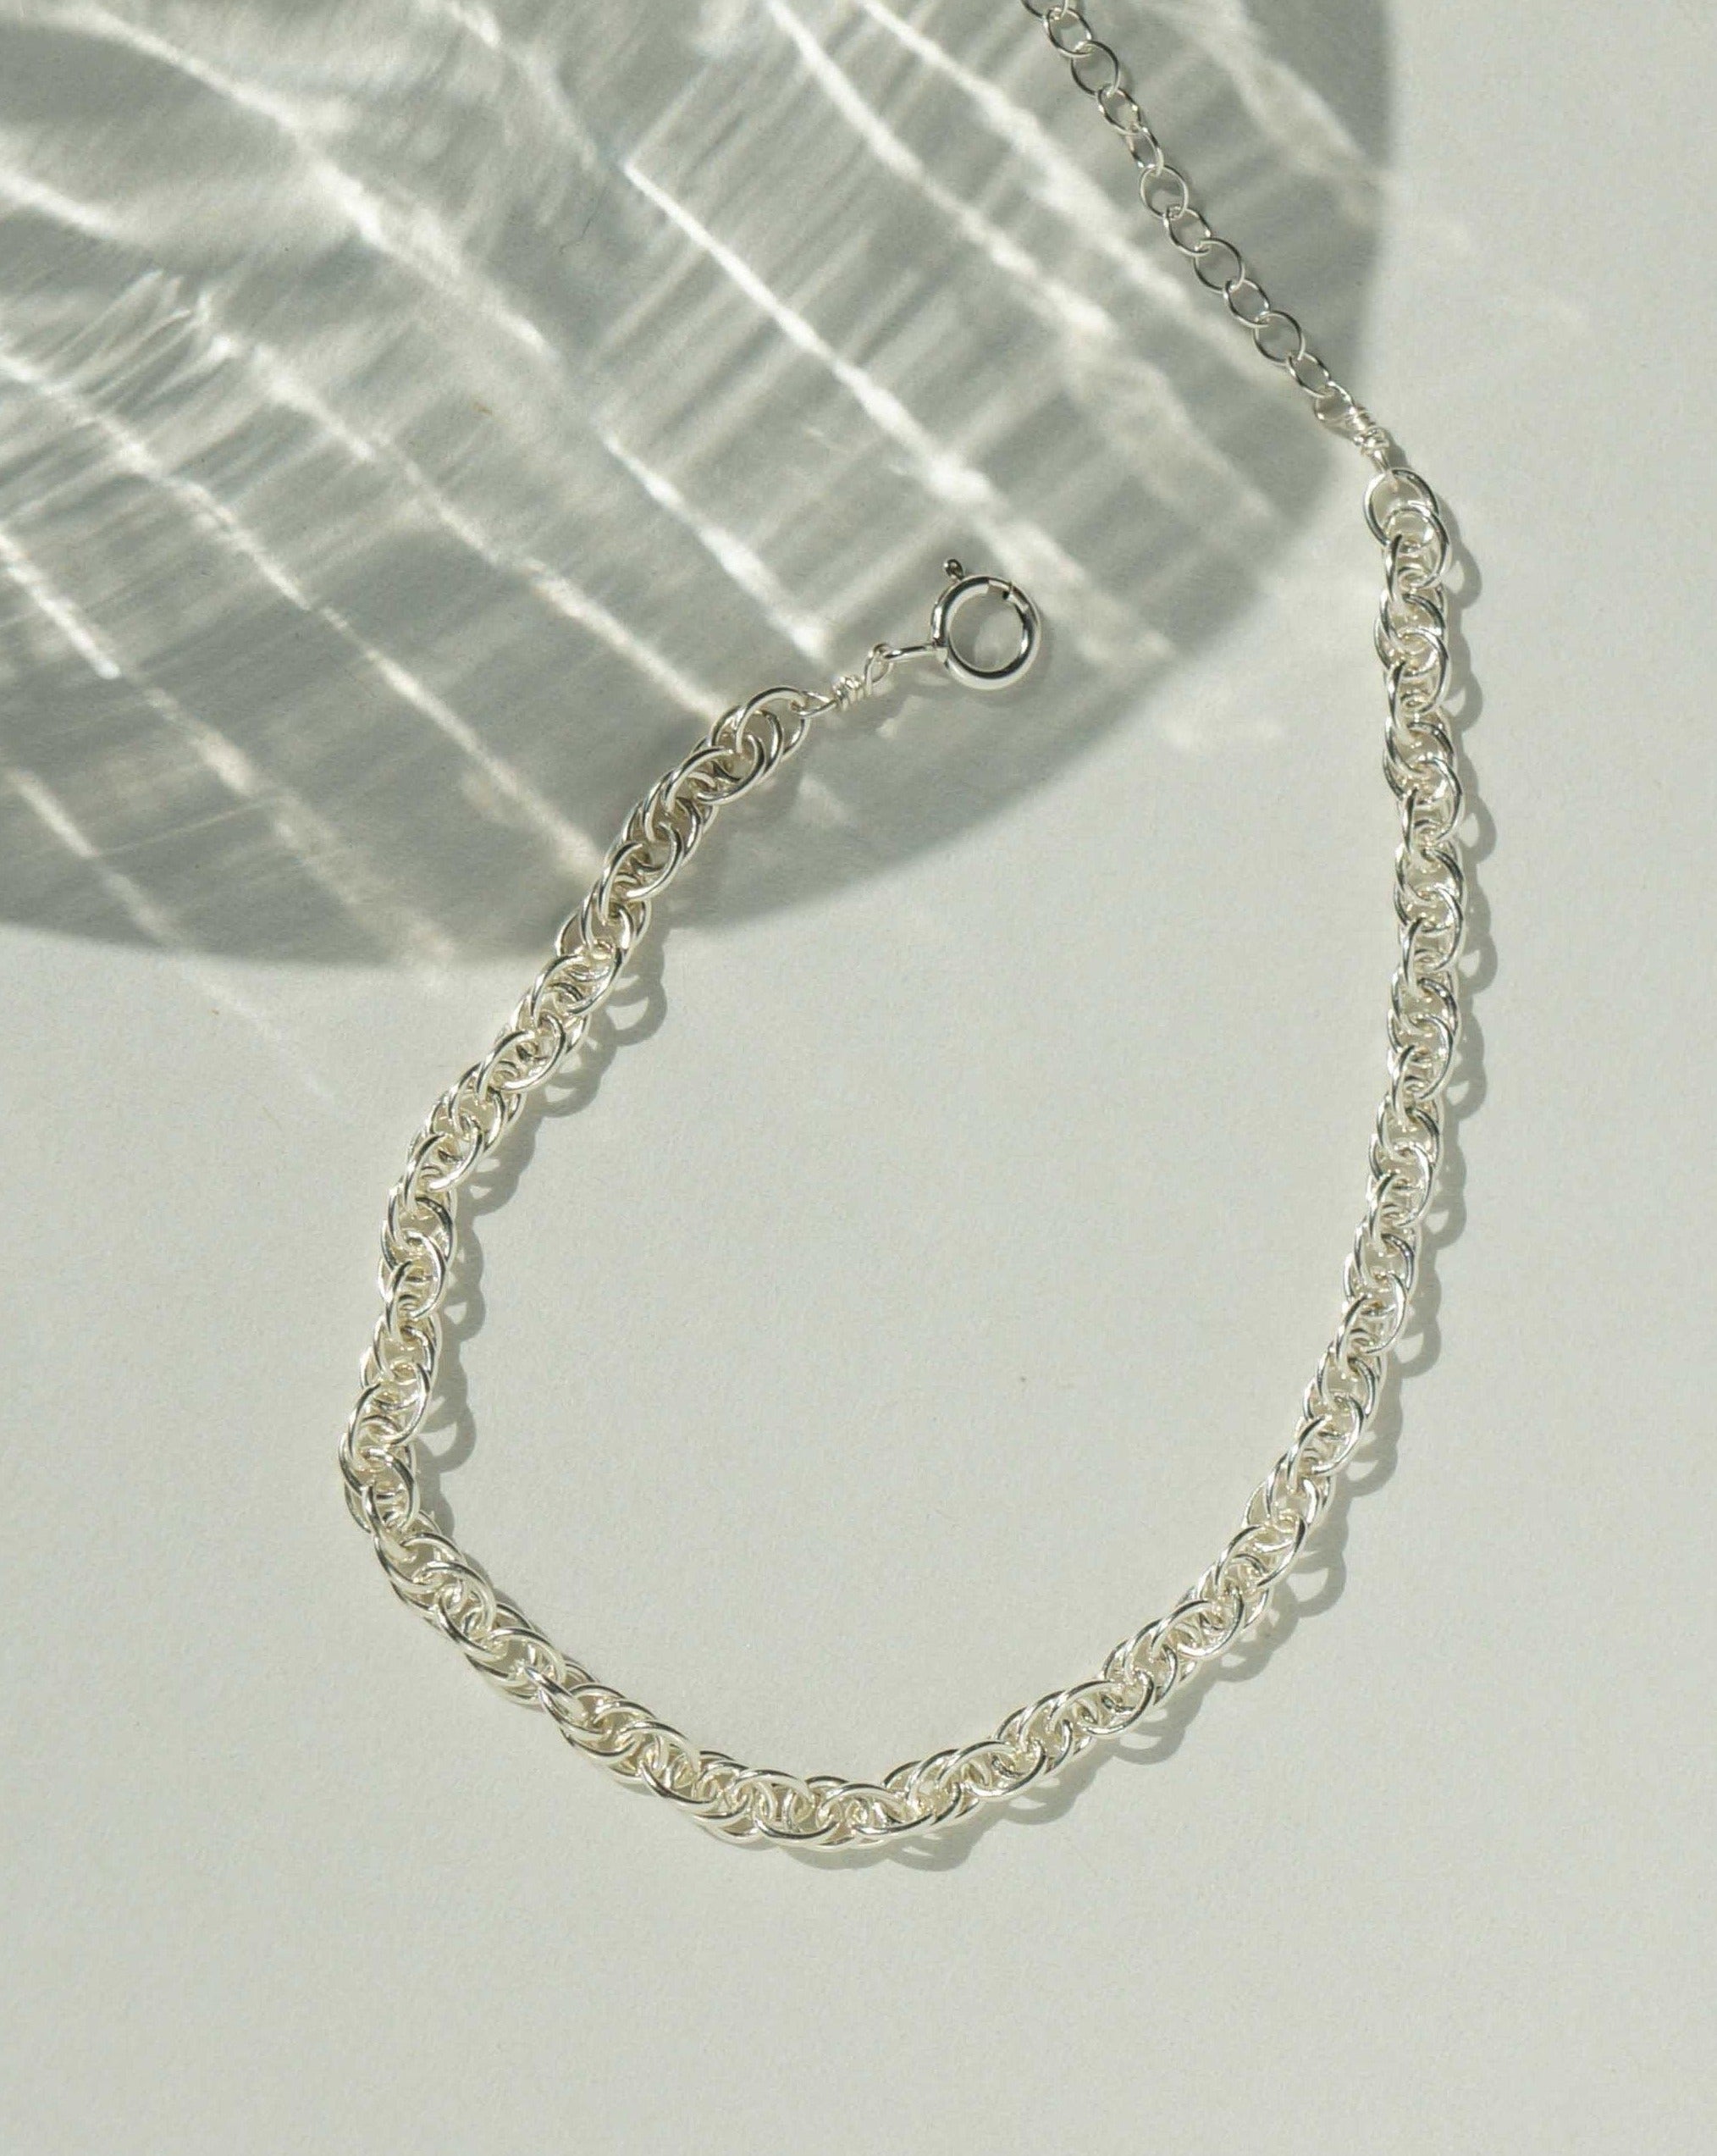 Beth Bracelet by KOZAKH. A 6 to 7 inch adjustable length bracelet in Sterling Silver. It is a 3.4mm thick twisted rope link chain style bracelet.